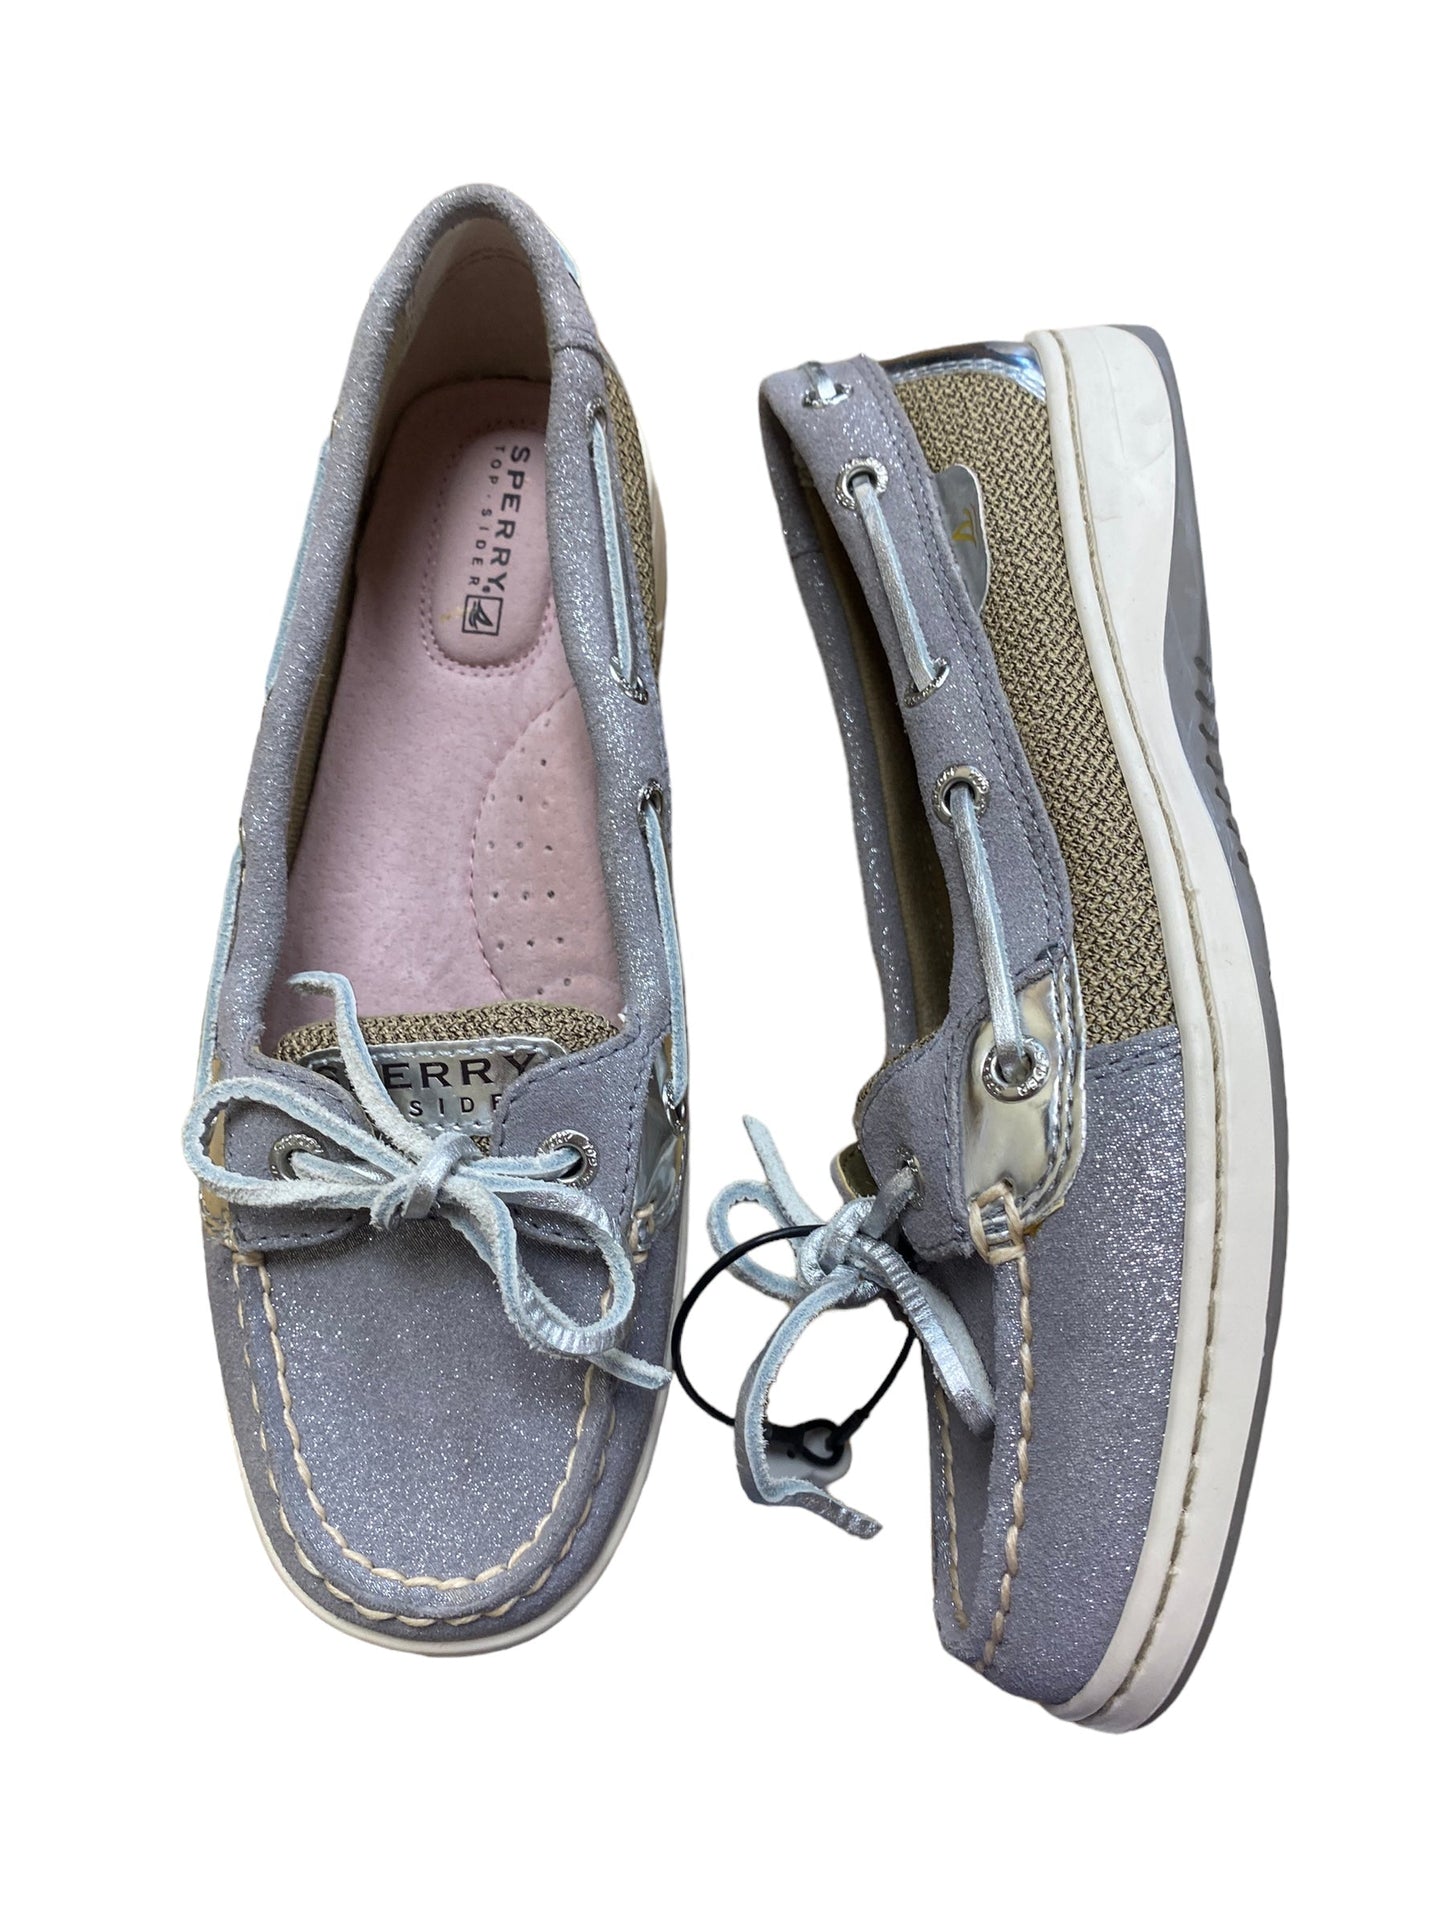 Shoes Flats By Sperry  Size: 6